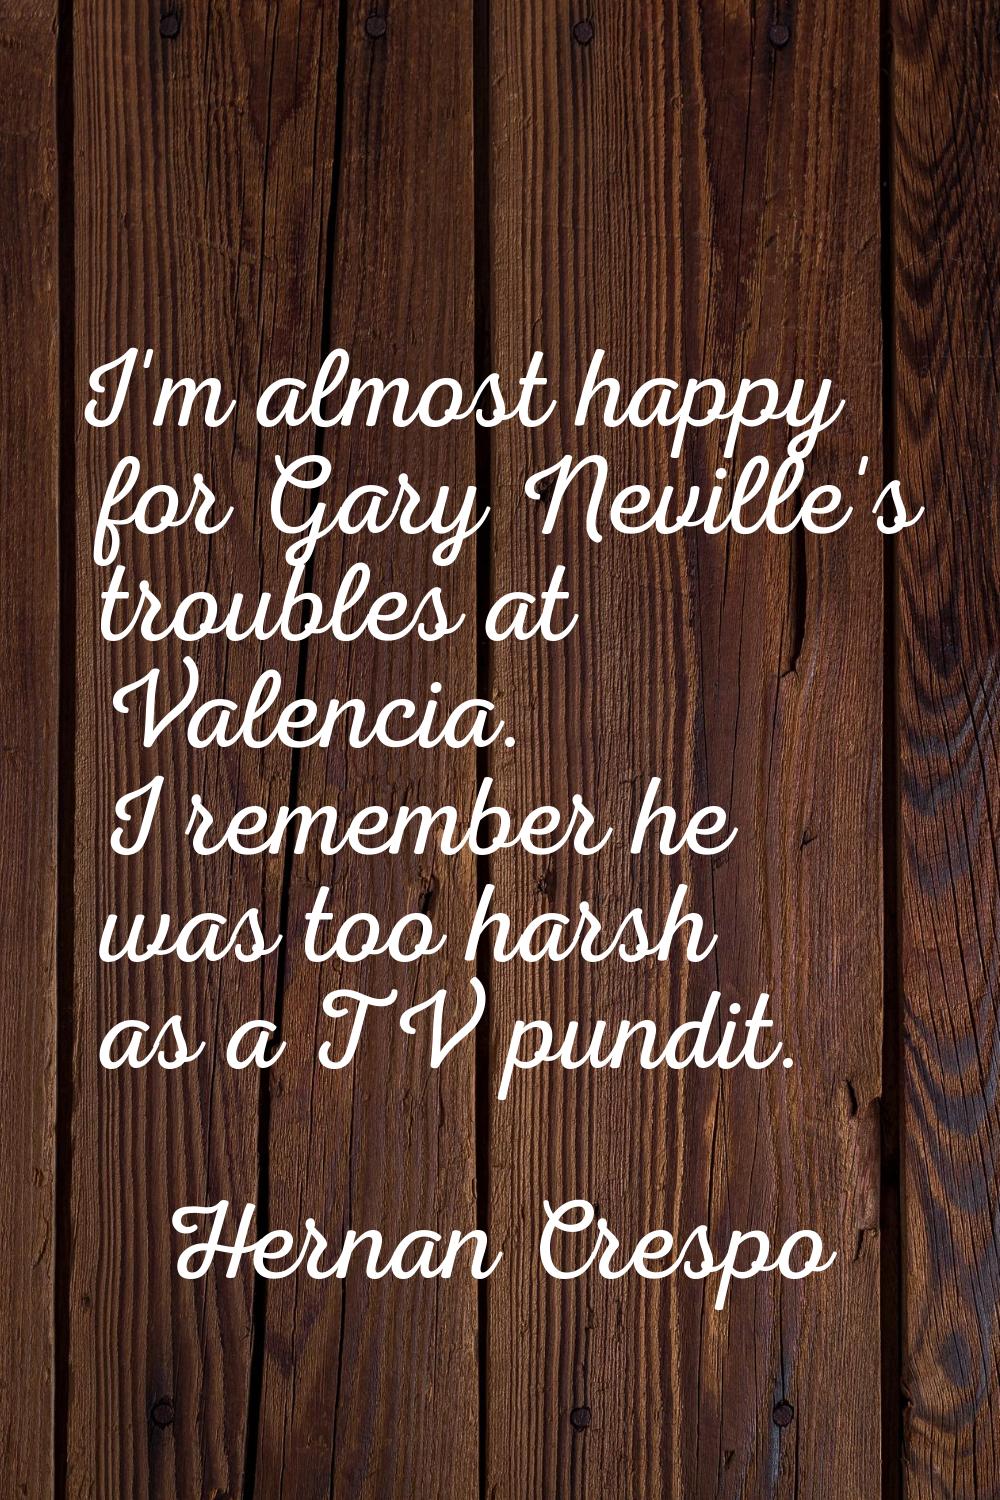 I'm almost happy for Gary Neville's troubles at Valencia. I remember he was too harsh as a TV pundi